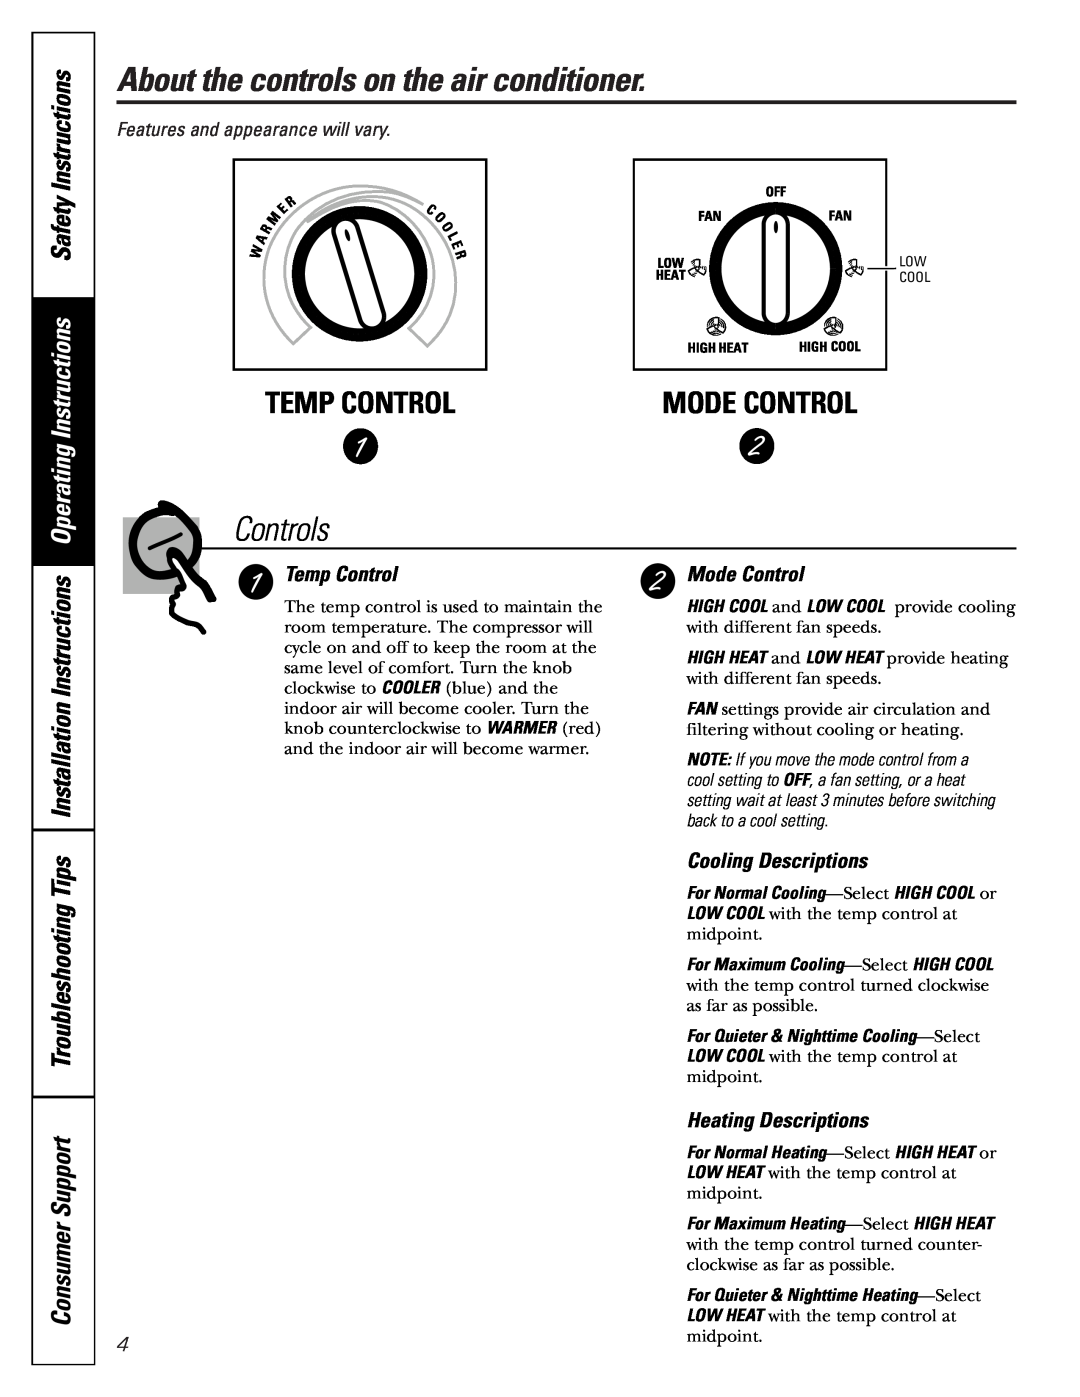 GE ASD06* About the controls on the air conditioner, Controls, Operating Instructions Safety Instructions, Temp Control 